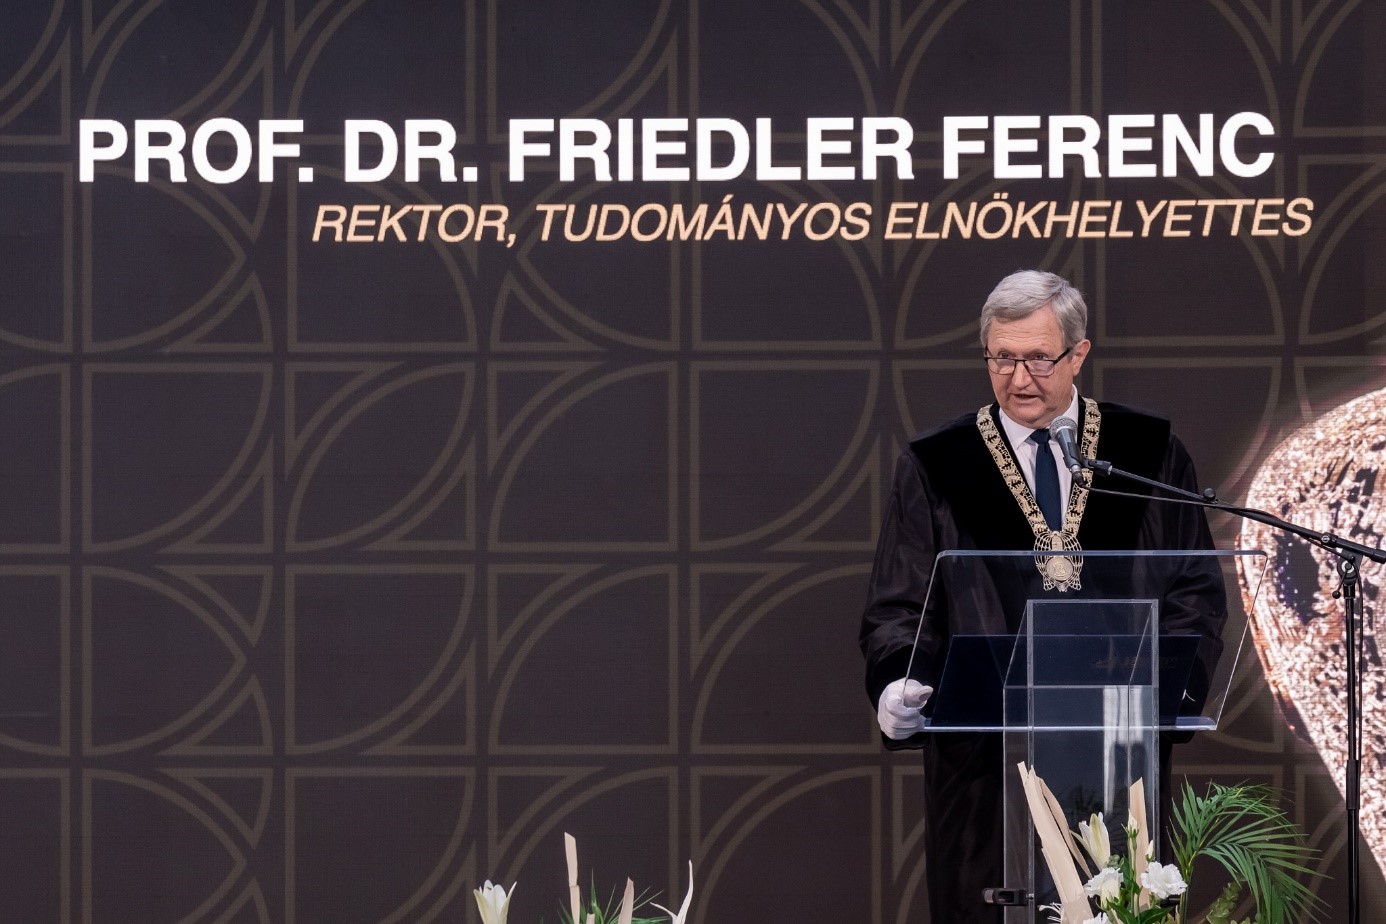 Professor Dr Ferenc Friedler, Rector and Vice-president for Academic Affairs of Széchenyi István University talked about the development of the institution over the last 50 years. 